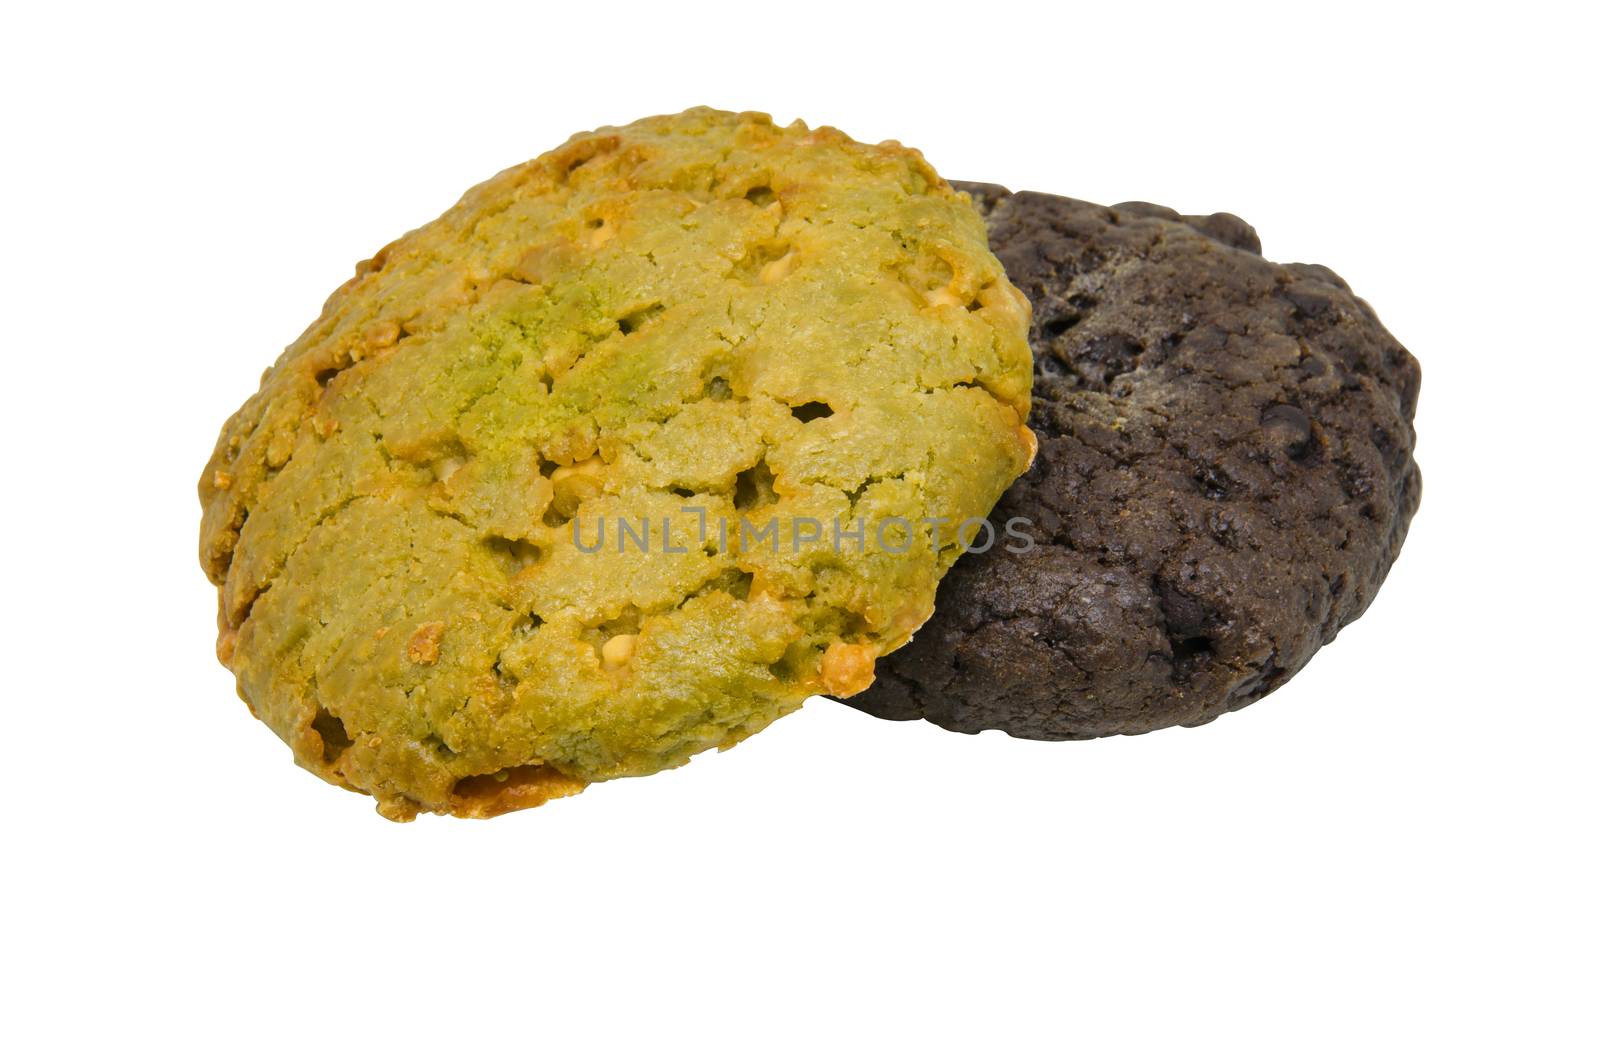 double chocolate and oatmeal cookie isolated on white background clipping path